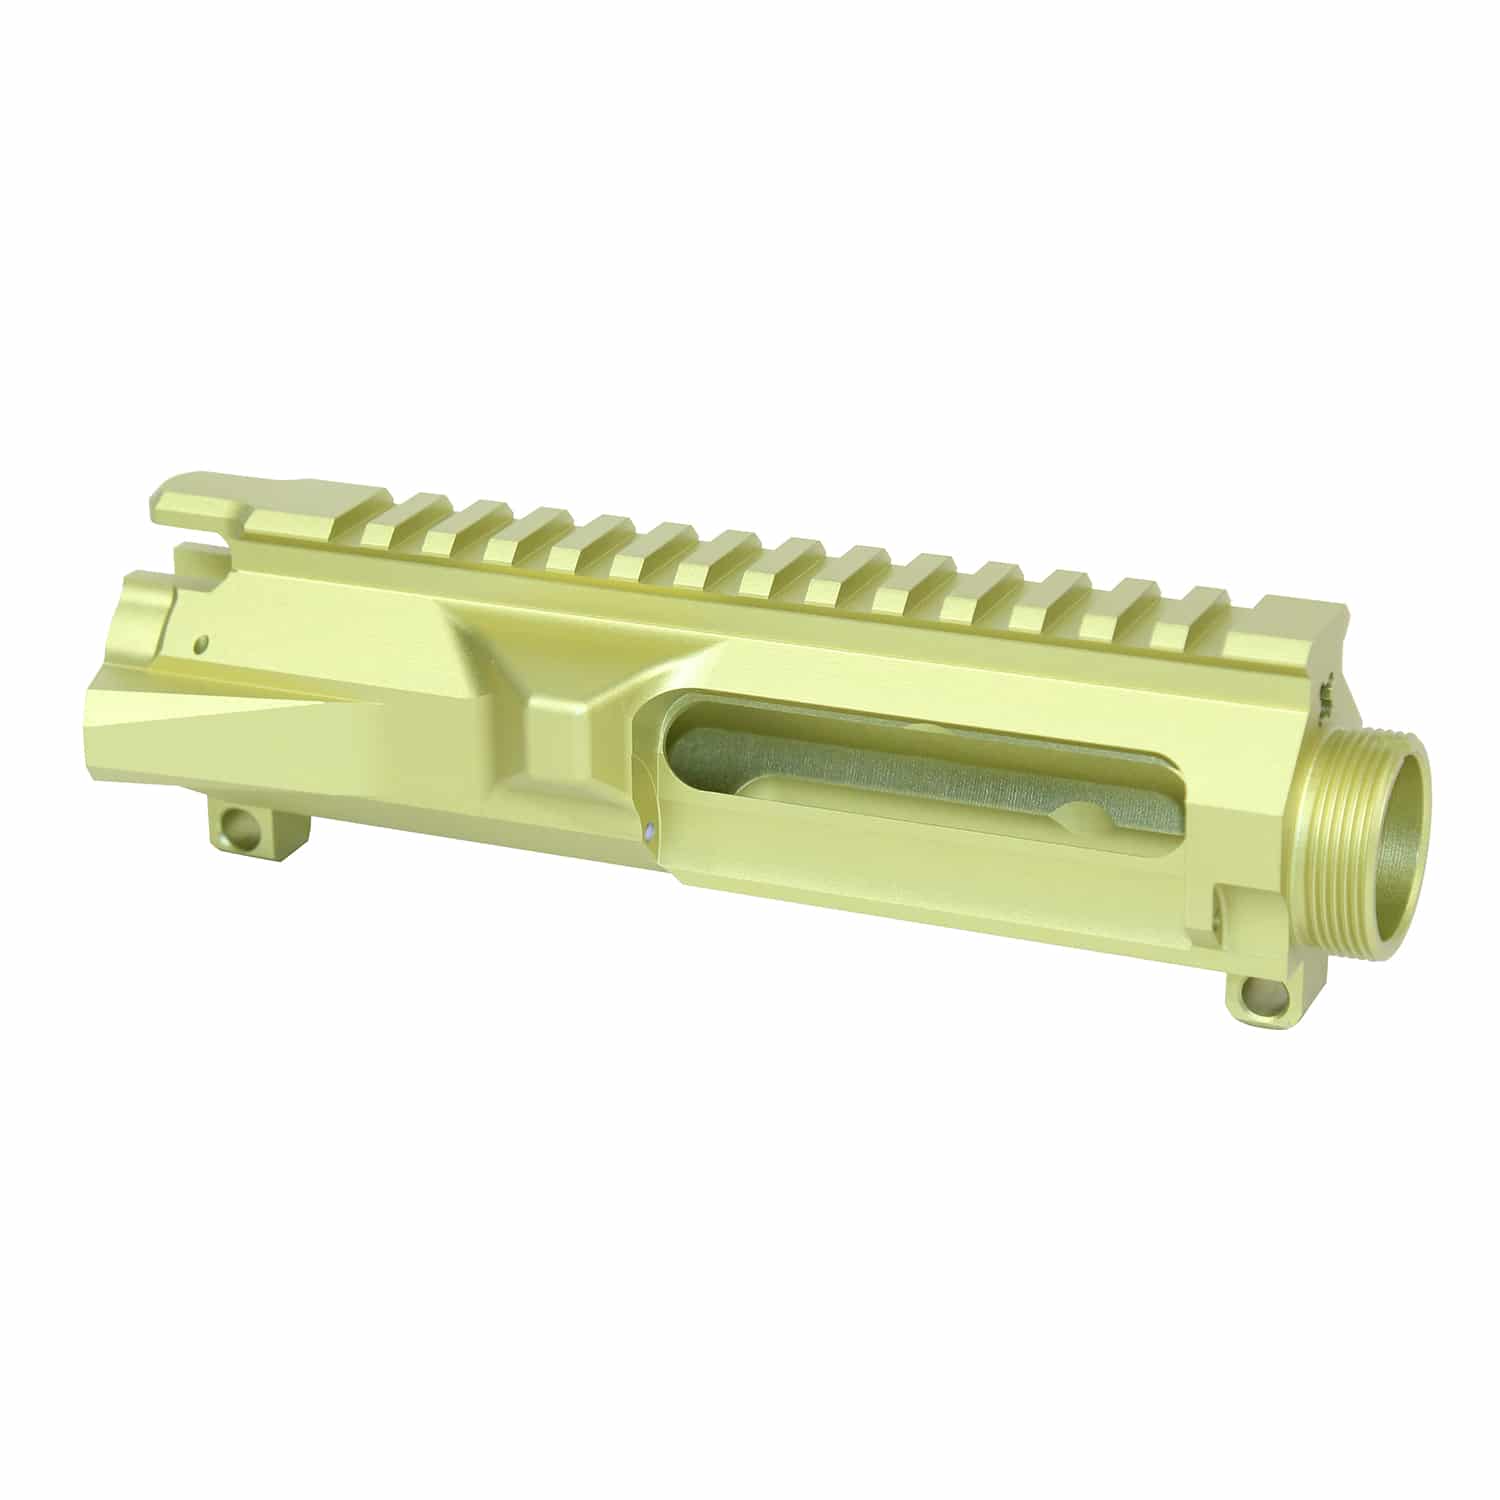 AR-15 M4 Stripped Billet Upper Receiver in Anodized Neon Yellow